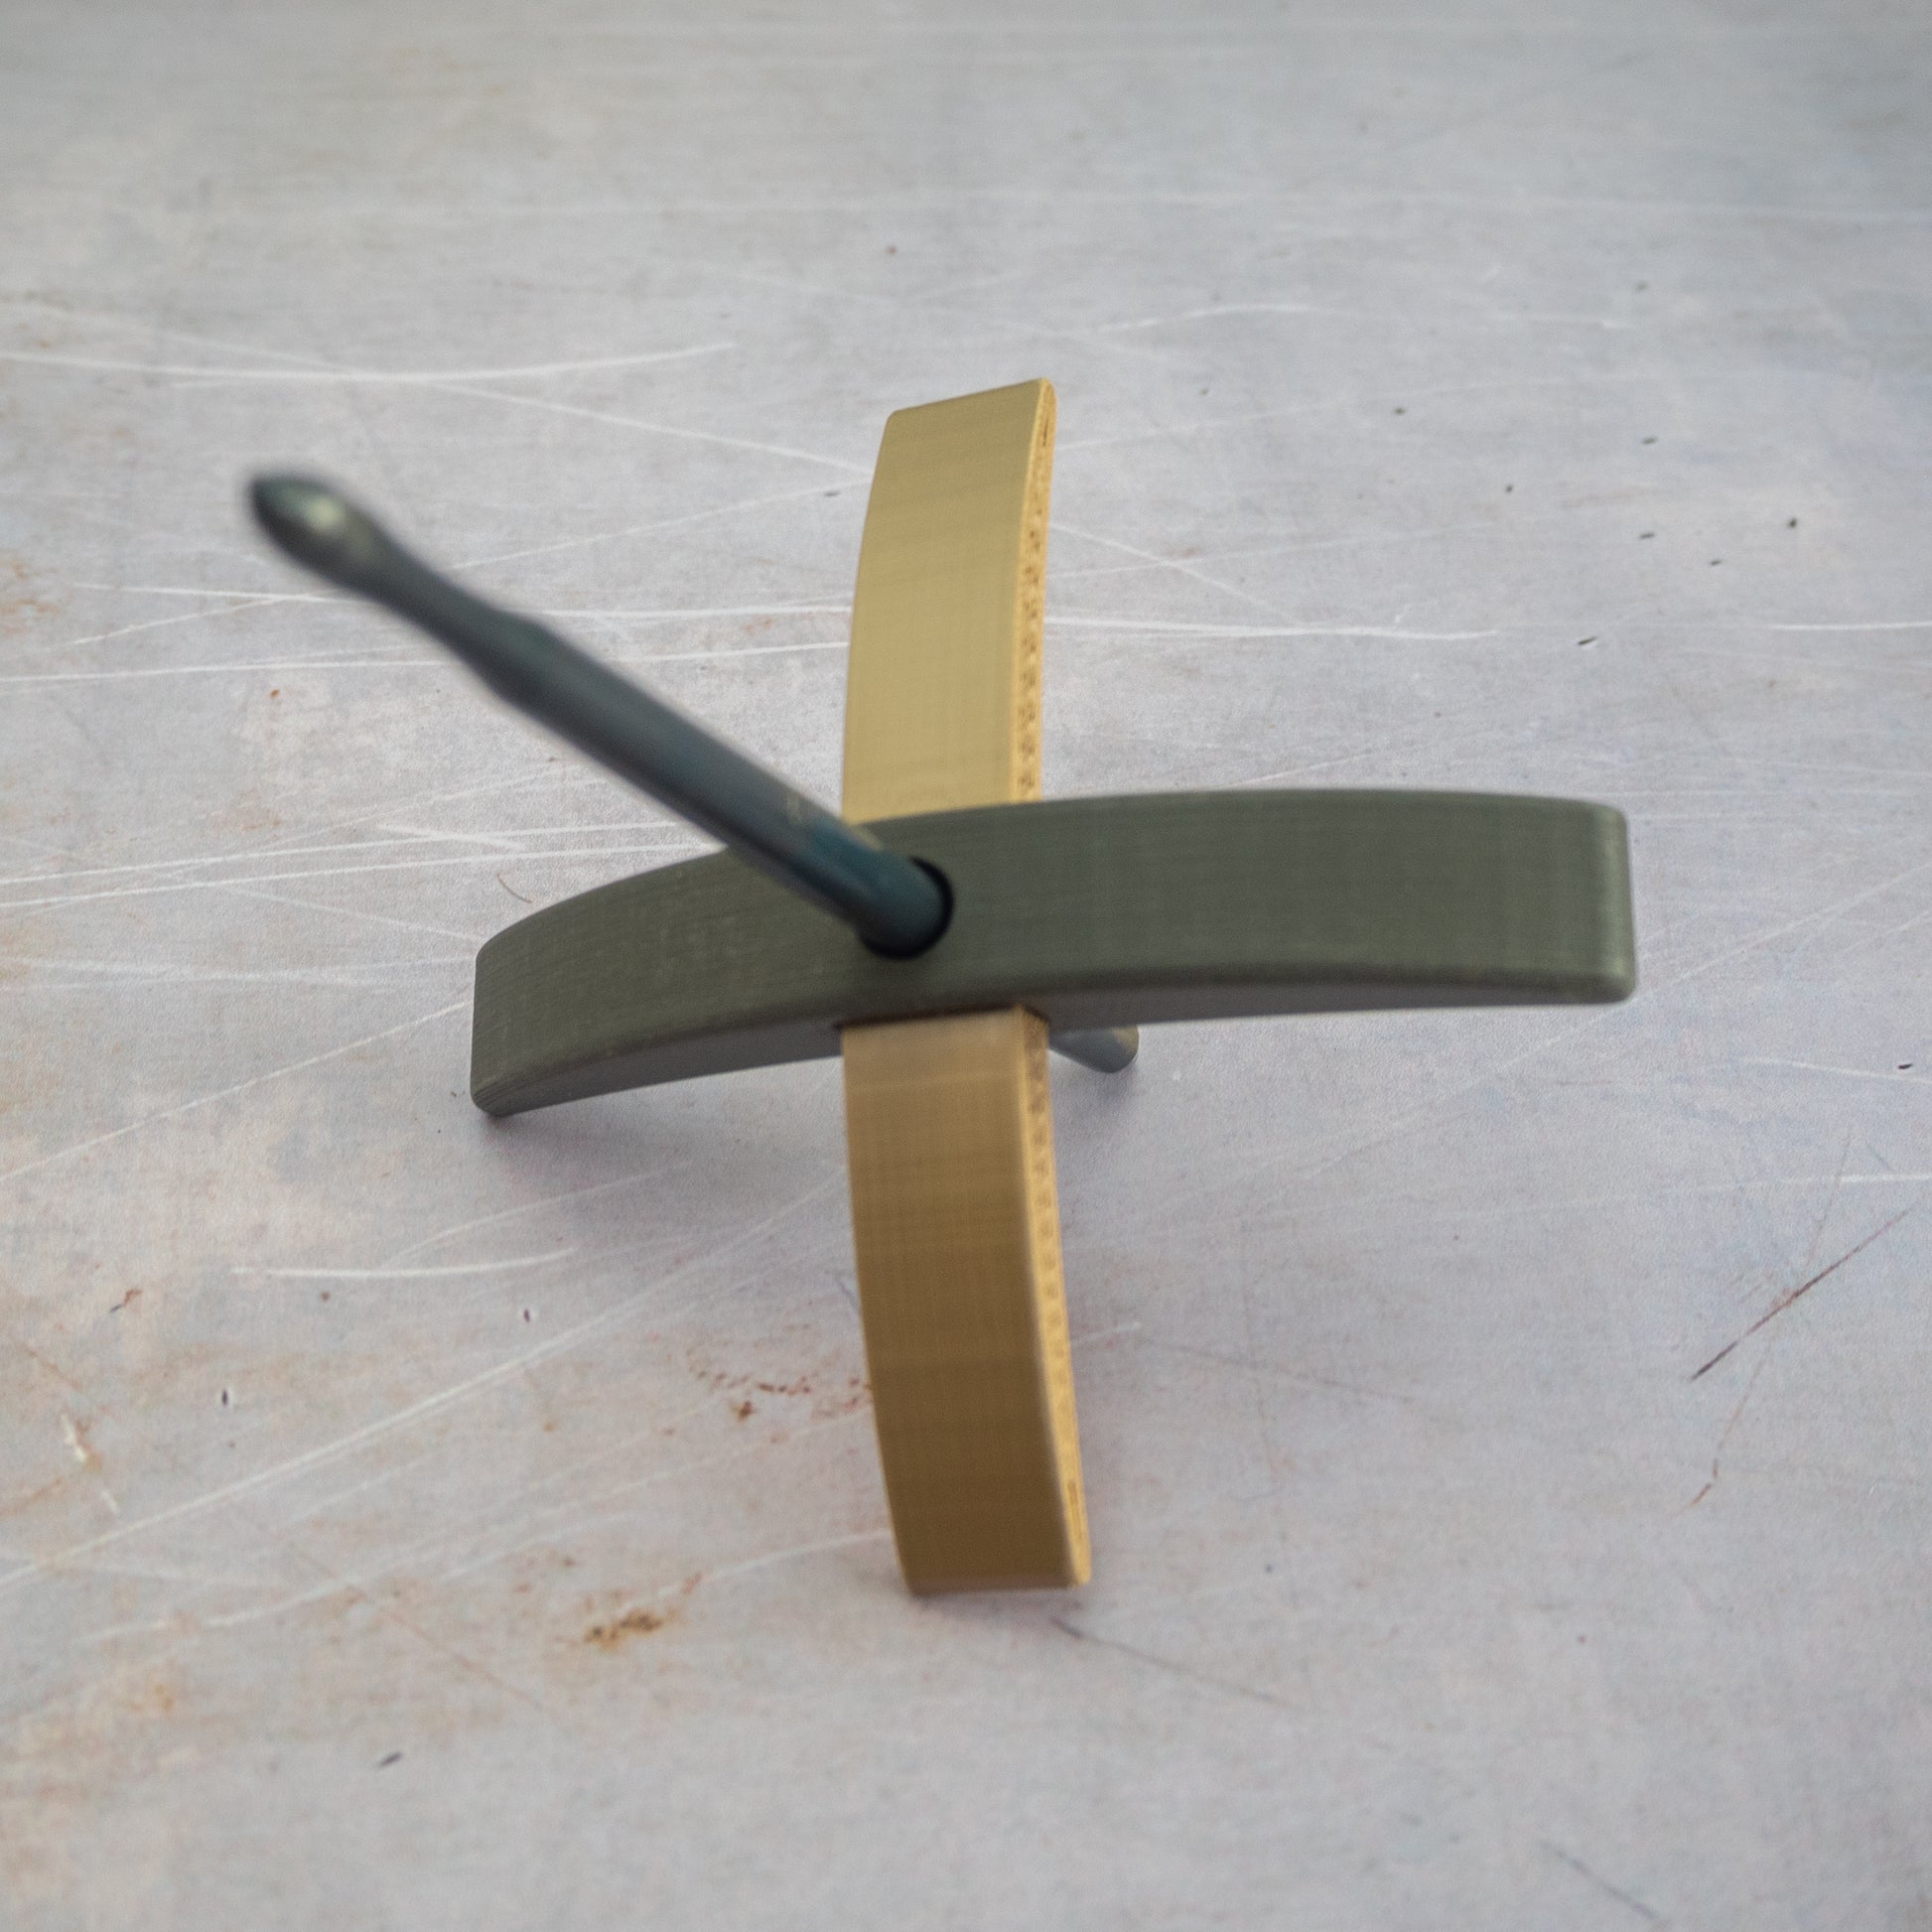 A midi-sized 3D printed Turkish spindle in slate and gold